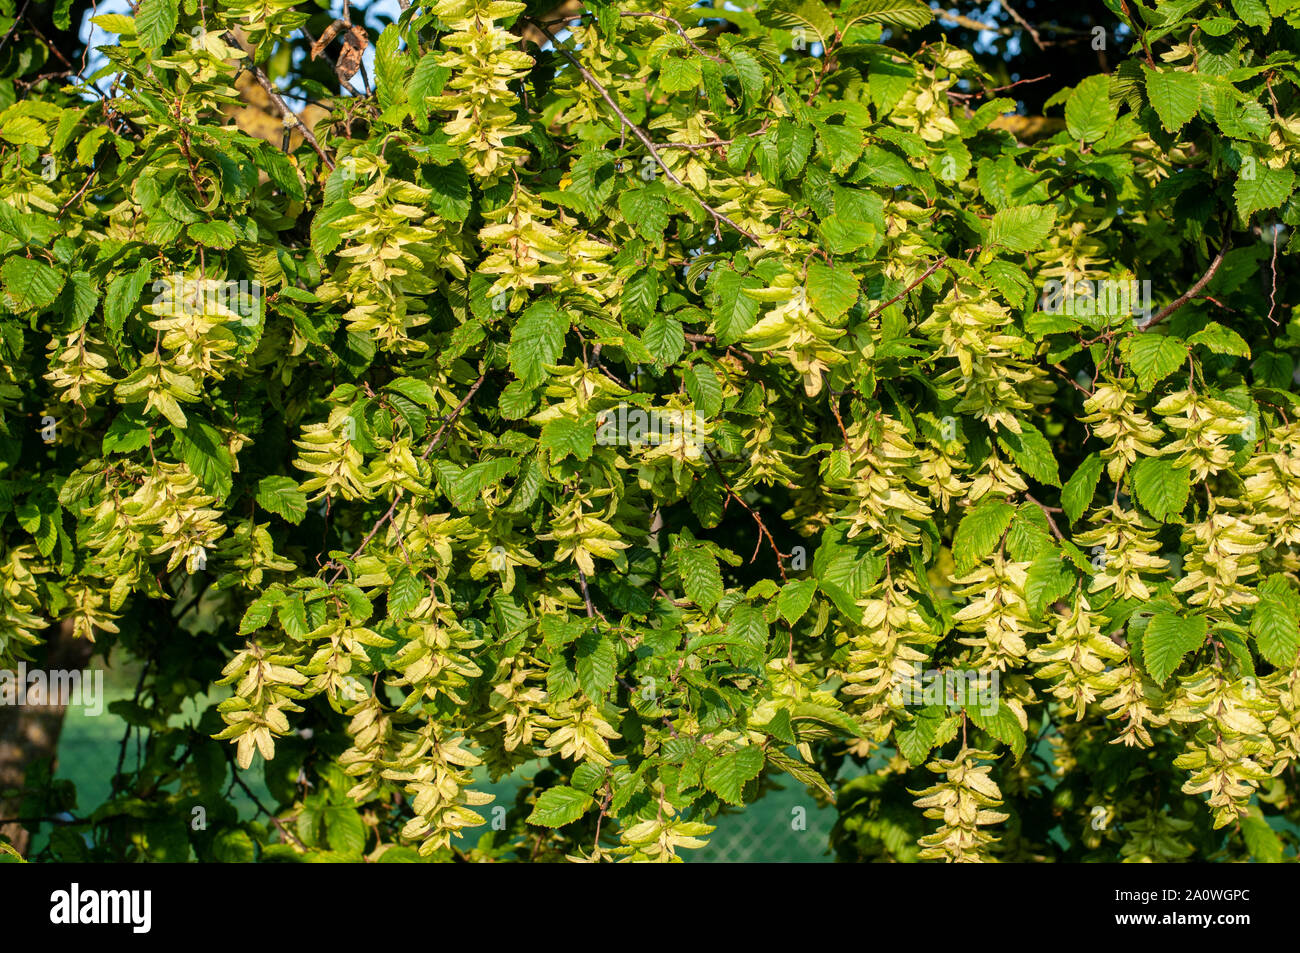 branches of carpinus betulus, the common hornbeam, full with hanging flowers Stock Photo